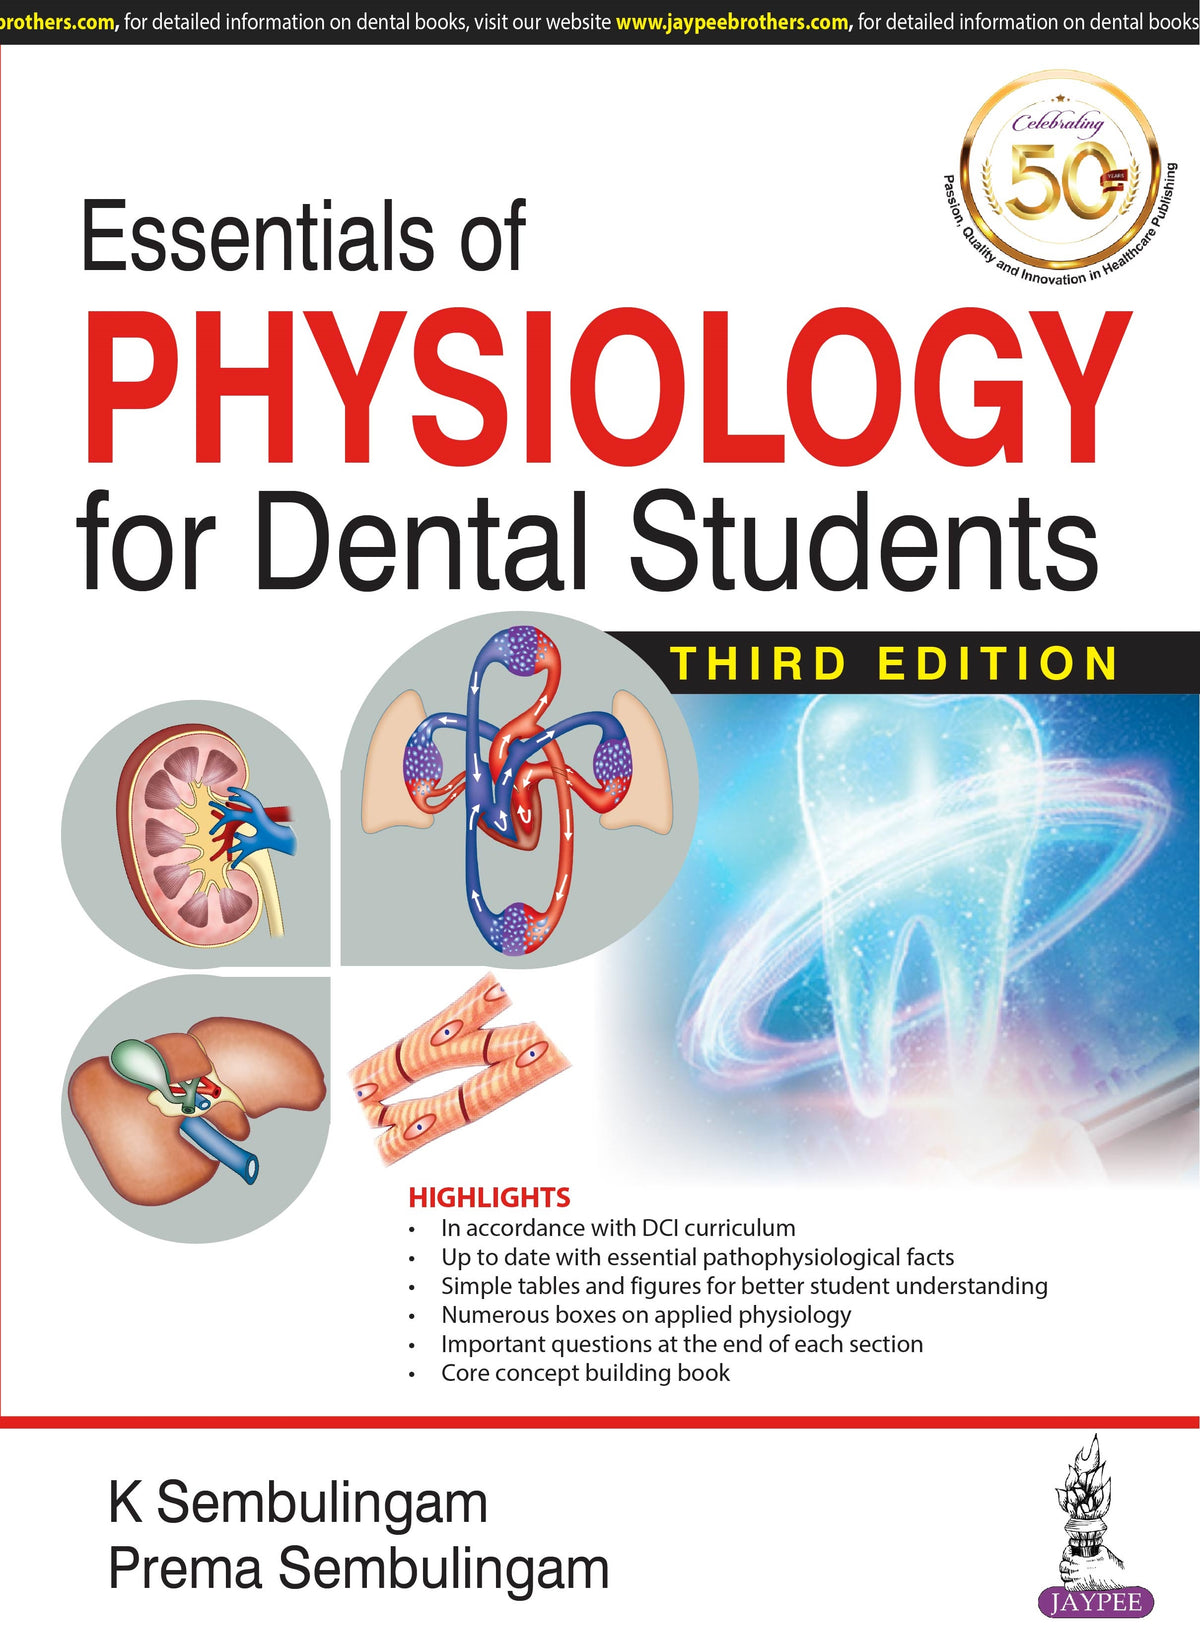 ESSENTIALS OF PHYSIOLOGY FOR DENTAL STUDENTS,3/E RP,K SEMBULINGAM